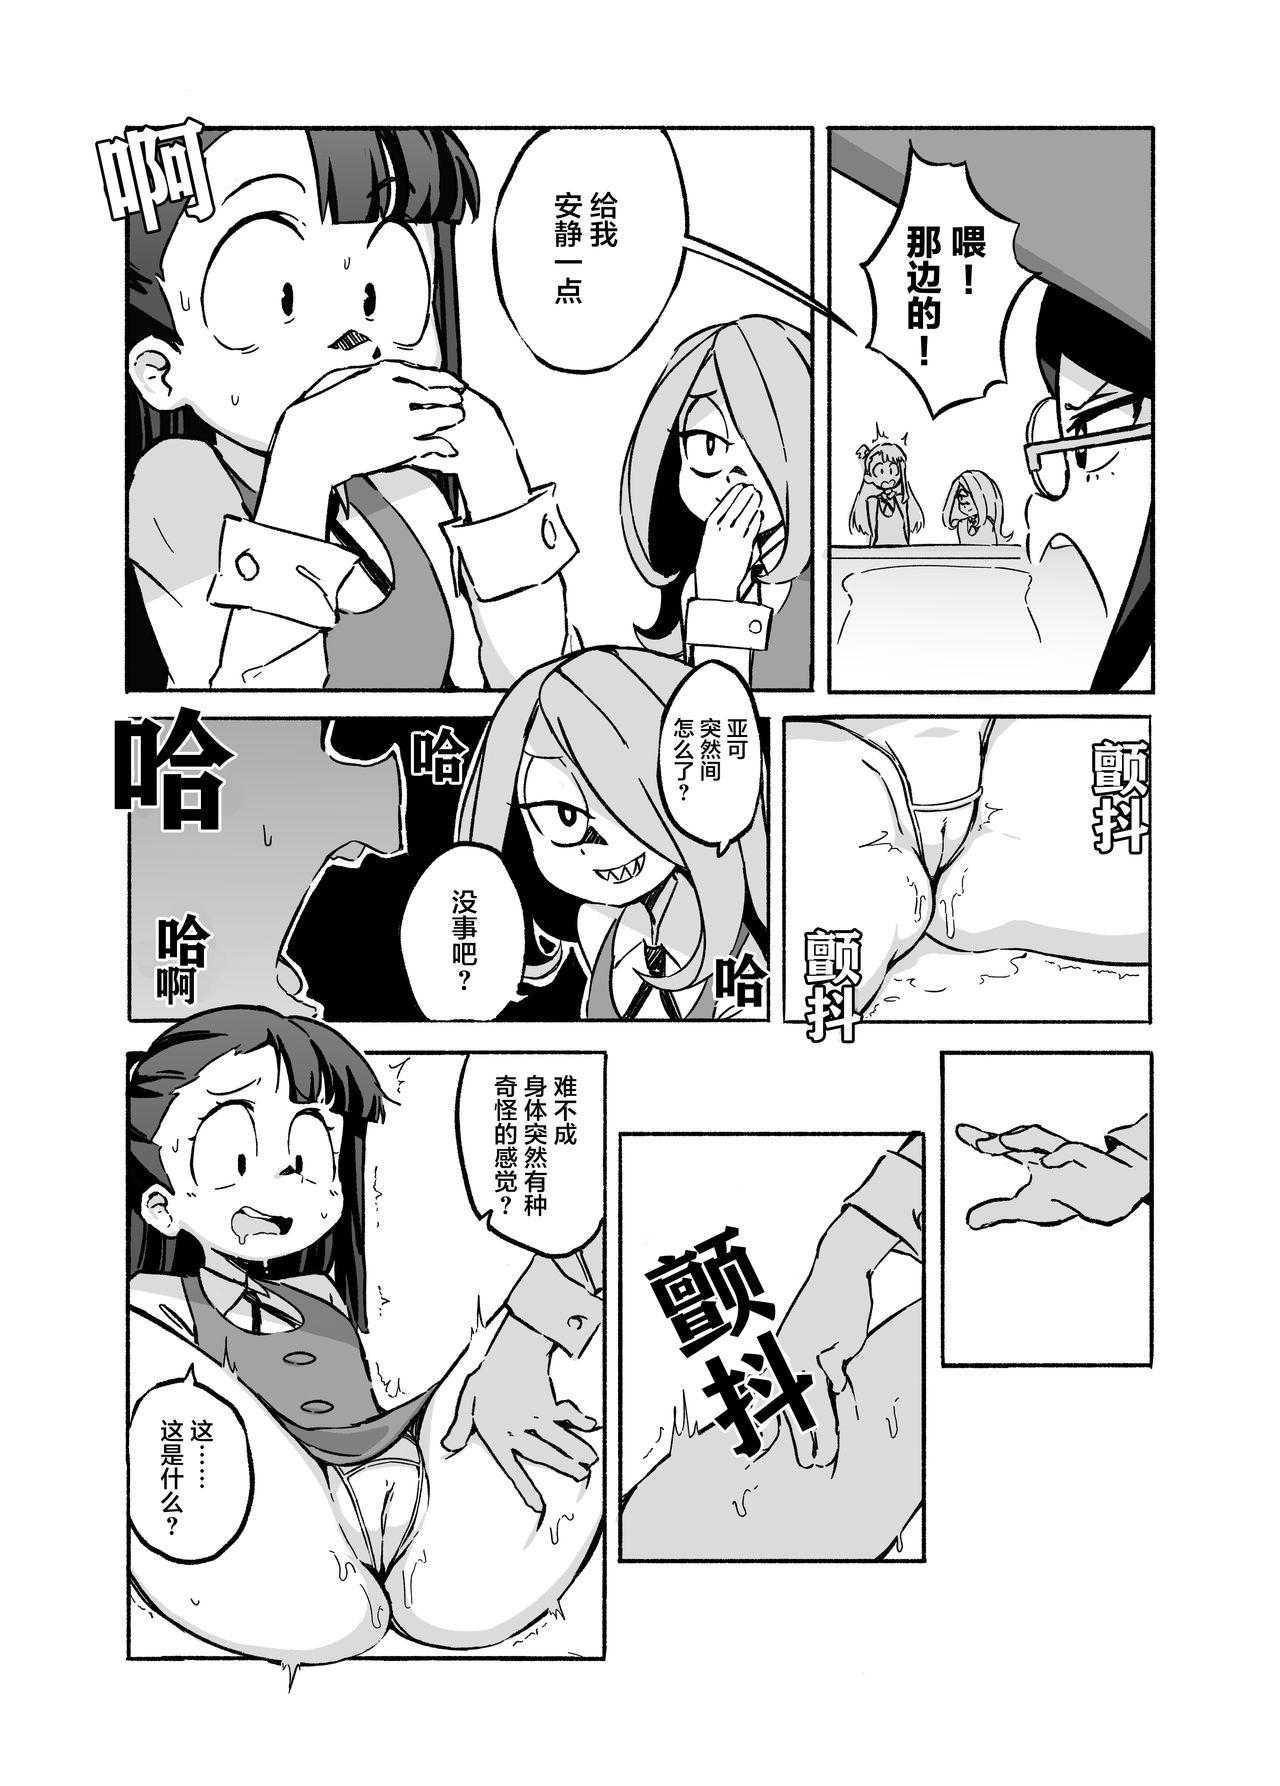 Nipples Mushroom Fever - Little witch academia Tinytits - Page 9